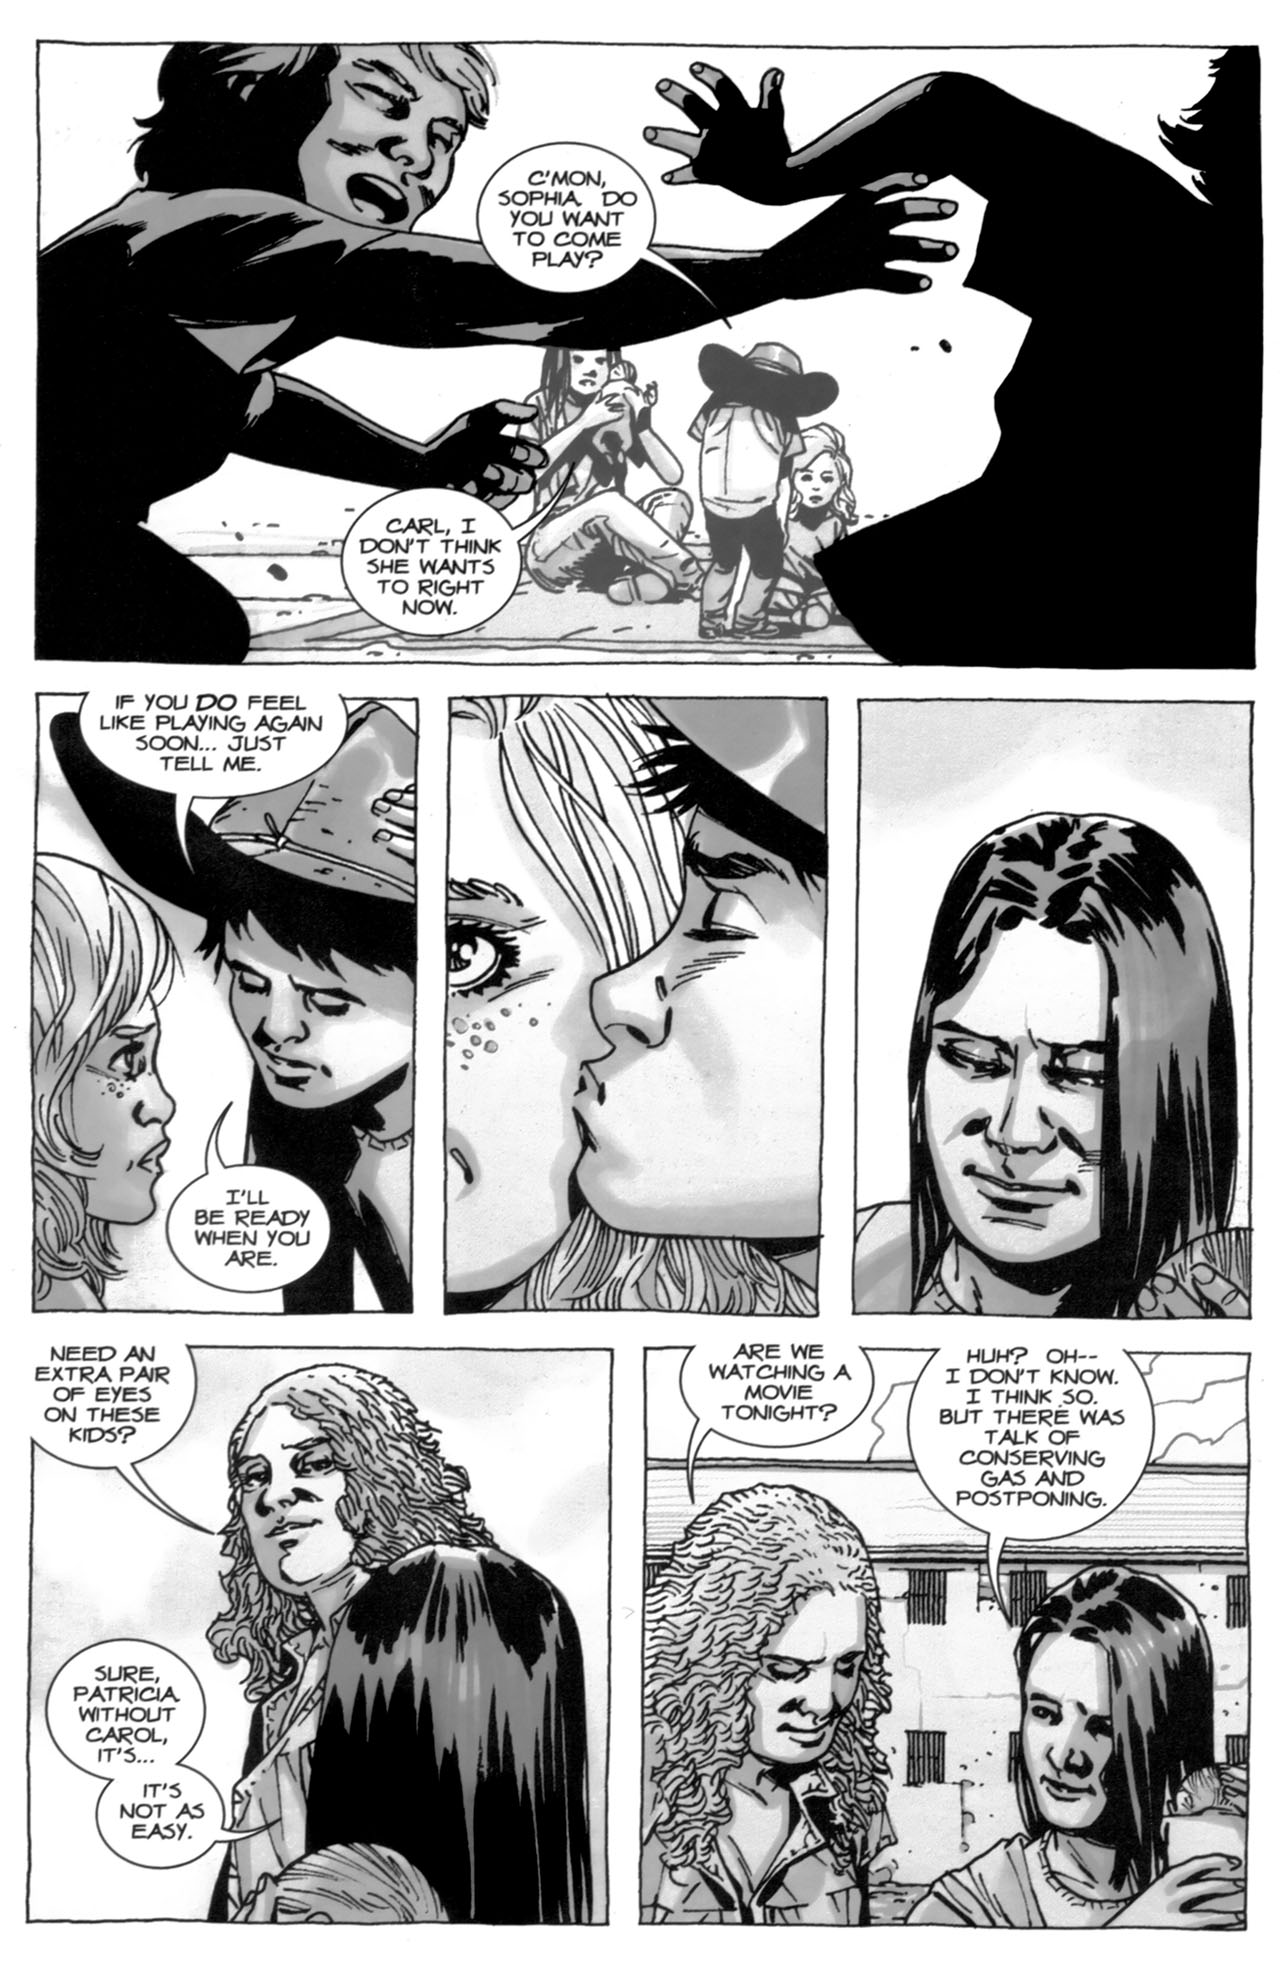 twd sophia kid comic - C'Mon, Sophia Do You Want To Come Play? Carl, I Don'T Think She Wants To Right Now. If You Do Feel Playing Again Soon... Just Tell Me. I'Ll Be Ready When You Are. Need An Extra Pair Of Eyes On These Kids? Are We Watching A Movie Ton